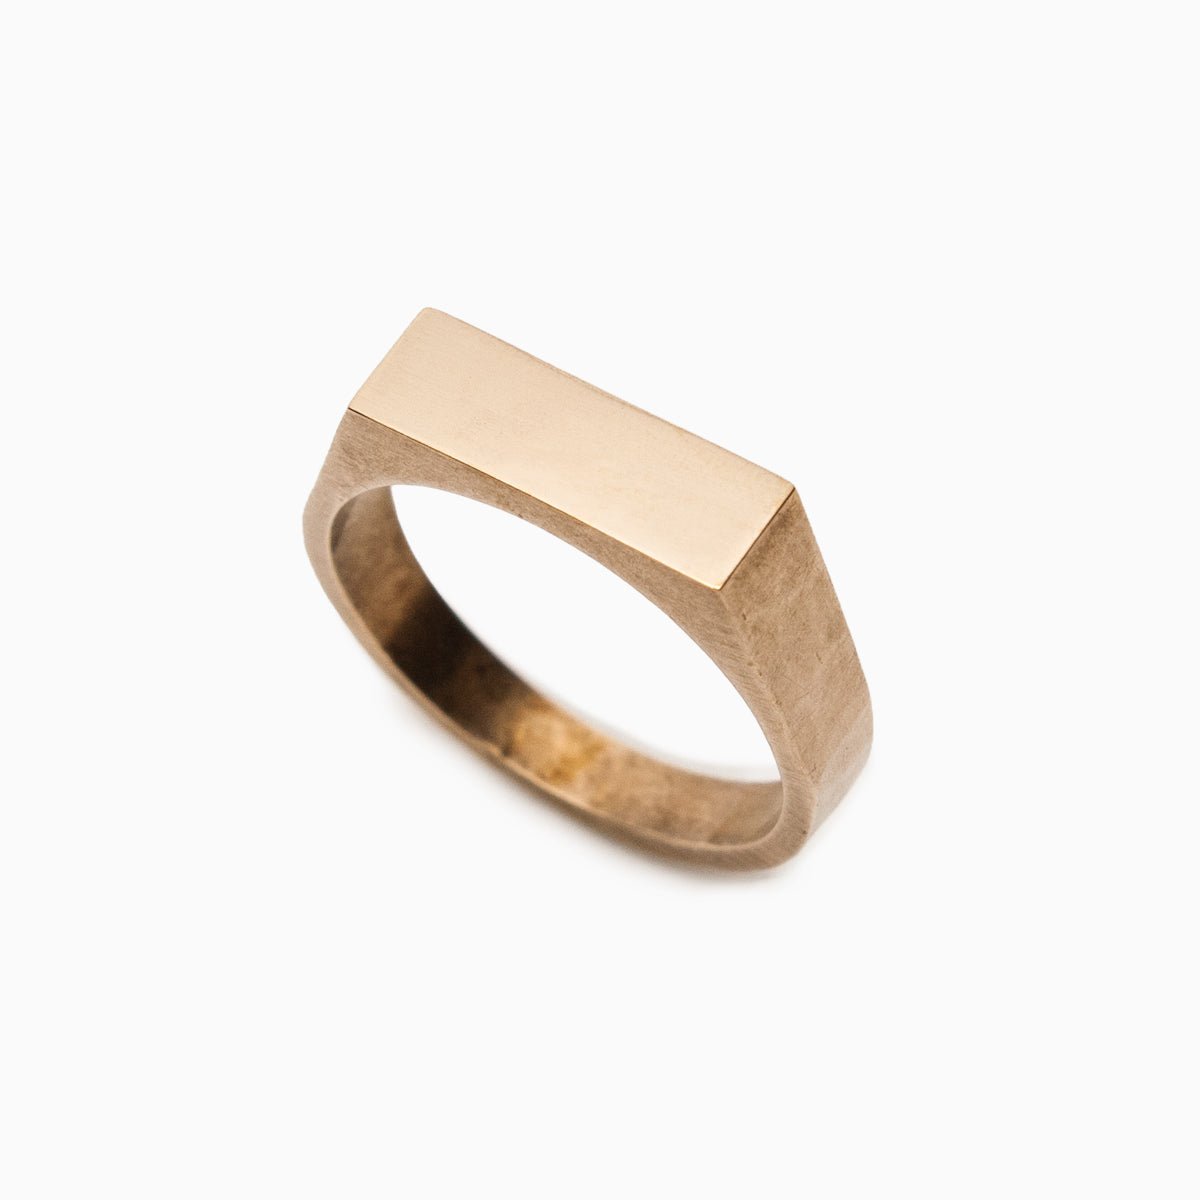 A narrow signet ring with a polished rectangular top and hammered detail on the band. Made in bronze. Designed and handcrafted in Portland, Oregon.